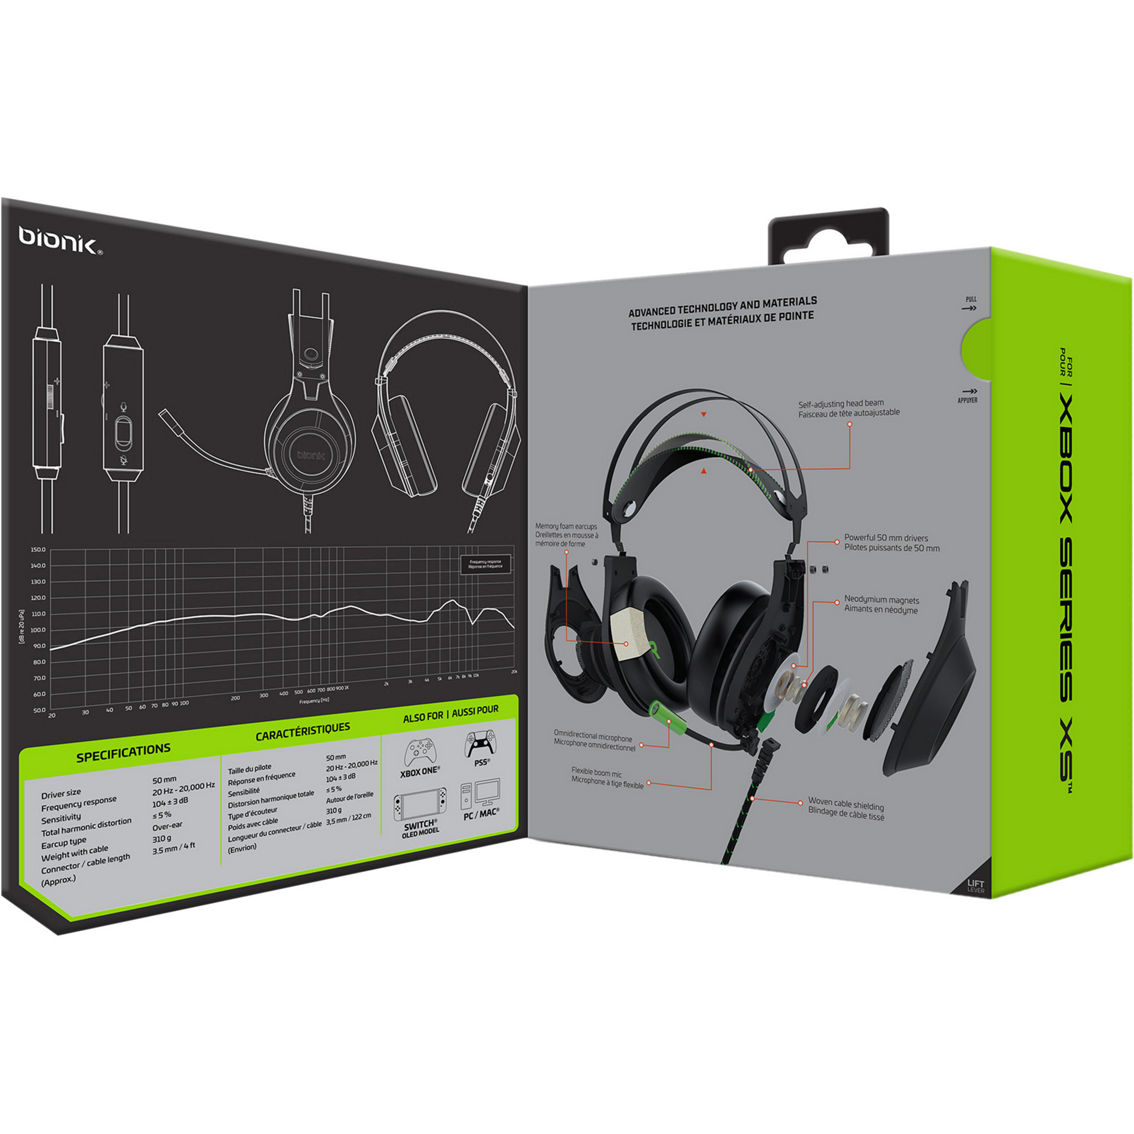 bionik Sirex Immersive Over-Ear Gaming Headset Xbox X/S Series - Image 2 of 3